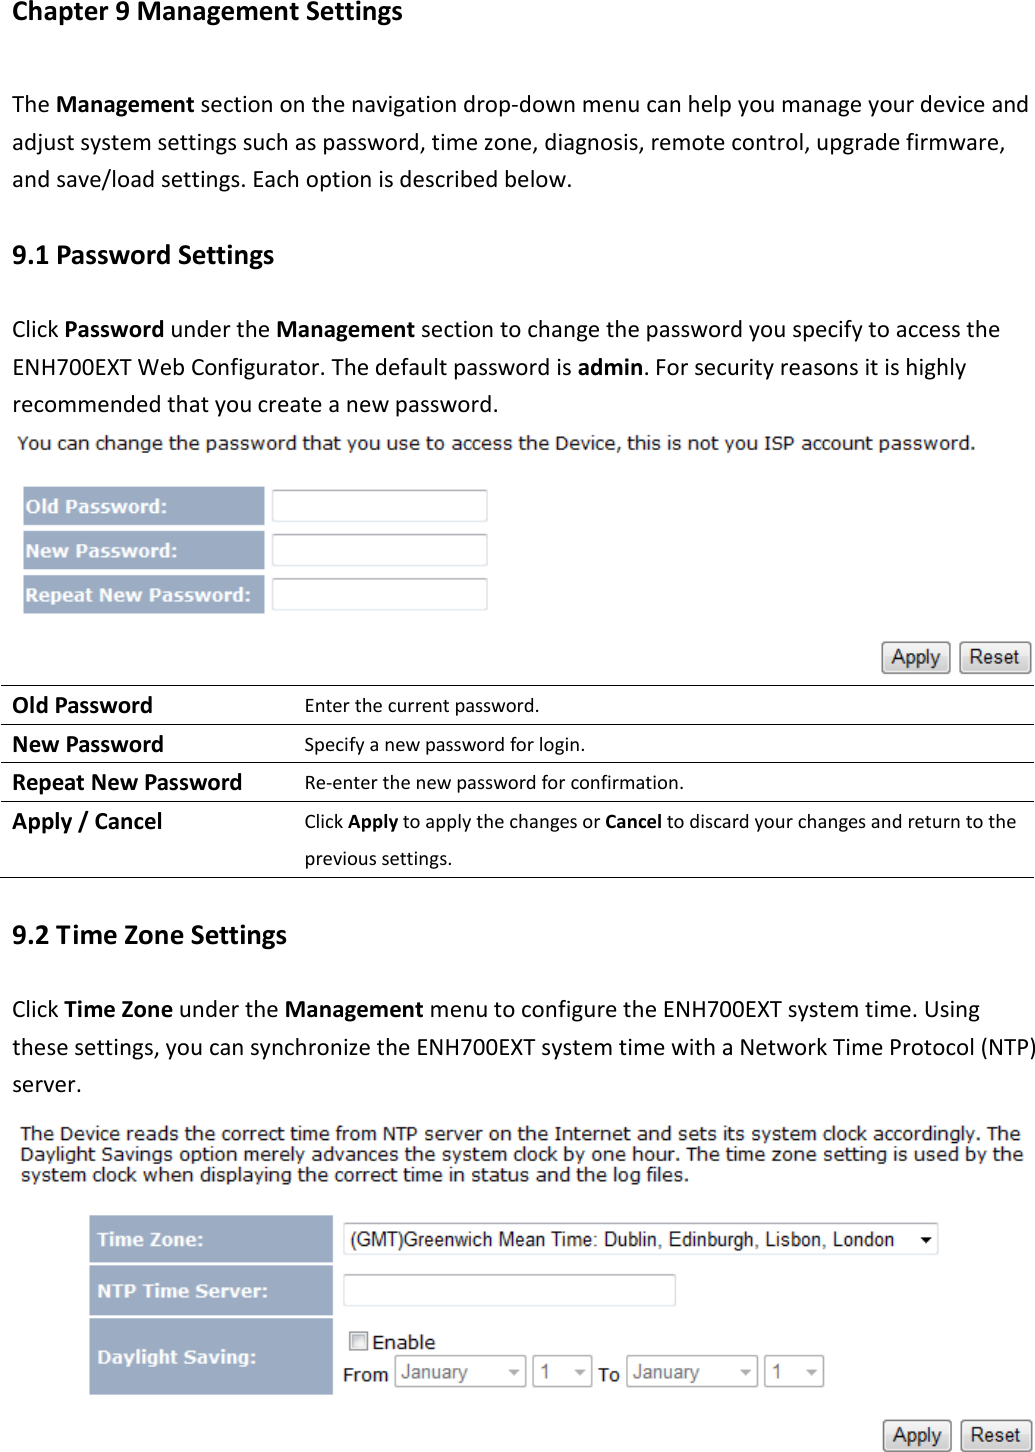 Chapter 9 Management Settings The Management section on the navigation drop-down menu can help you manage your device and adjust system settings such as password, time zone, diagnosis, remote control, upgrade firmware, and save/load settings. Each option is described below. 9.1 Password Settings Click Password under the Management section to change the password you specify to access the ENH700EXT Web Configurator. The default password is admin. For security reasons it is highly recommended that you create a new password.  Old Password Enter the current password. New Password Specify a new password for login. Repeat New Password Re-enter the new password for confirmation. Apply / Cancel Click Apply to apply the changes or Cancel to discard your changes and return to the previous settings. 9.2 Time Zone Settings Click Time Zone under the Management menu to configure the ENH700EXT system time. Using these settings, you can synchronize the ENH700EXT system time with a Network Time Protocol (NTP) server.  